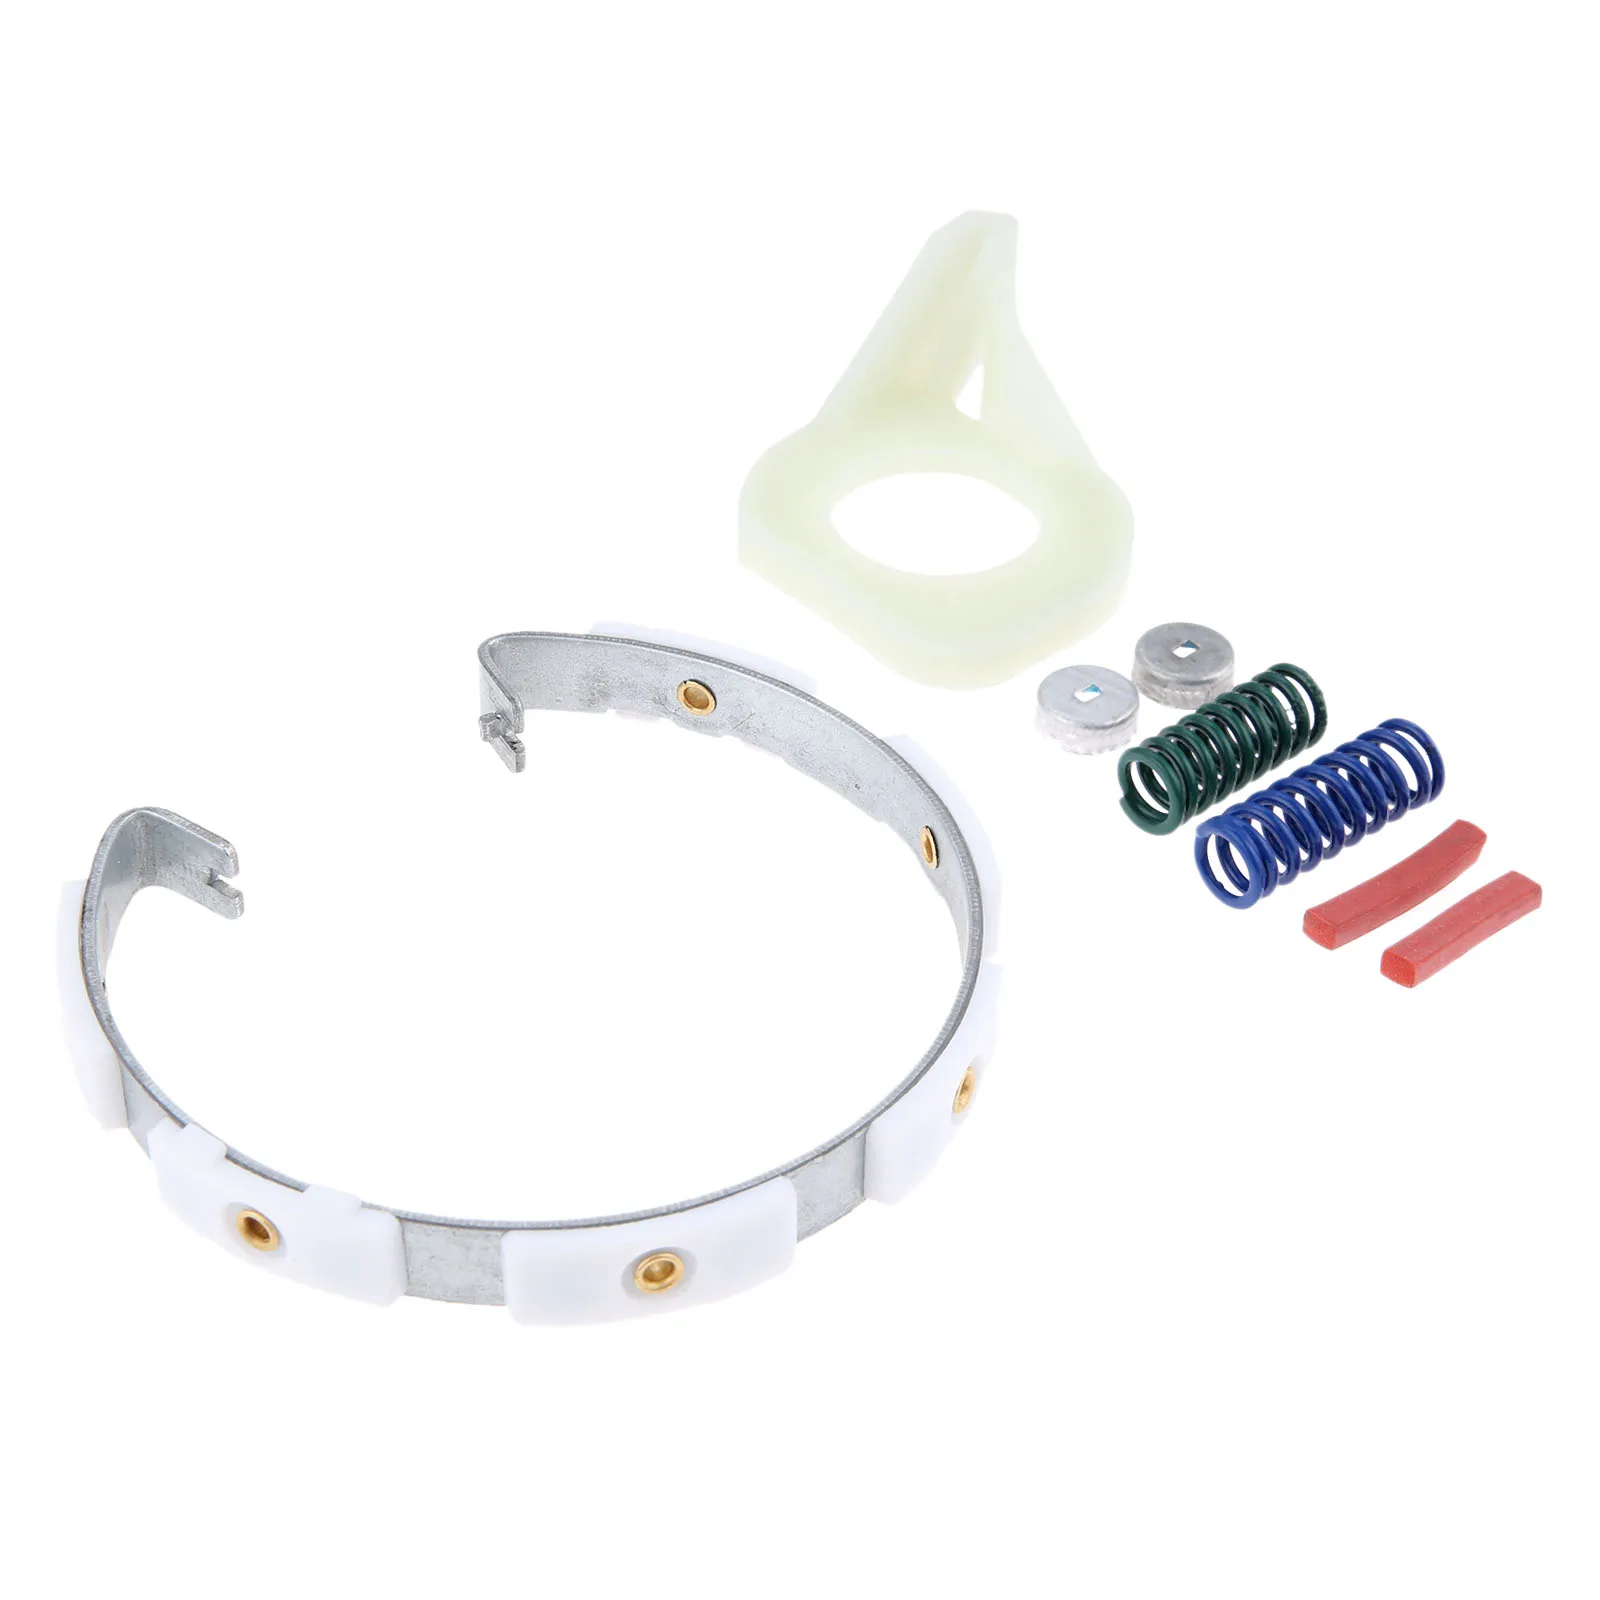 bowarepro 285790 AP3094538 PS334642 Washer Clutch Band & Lining Kit for Whirlpool Home Tool